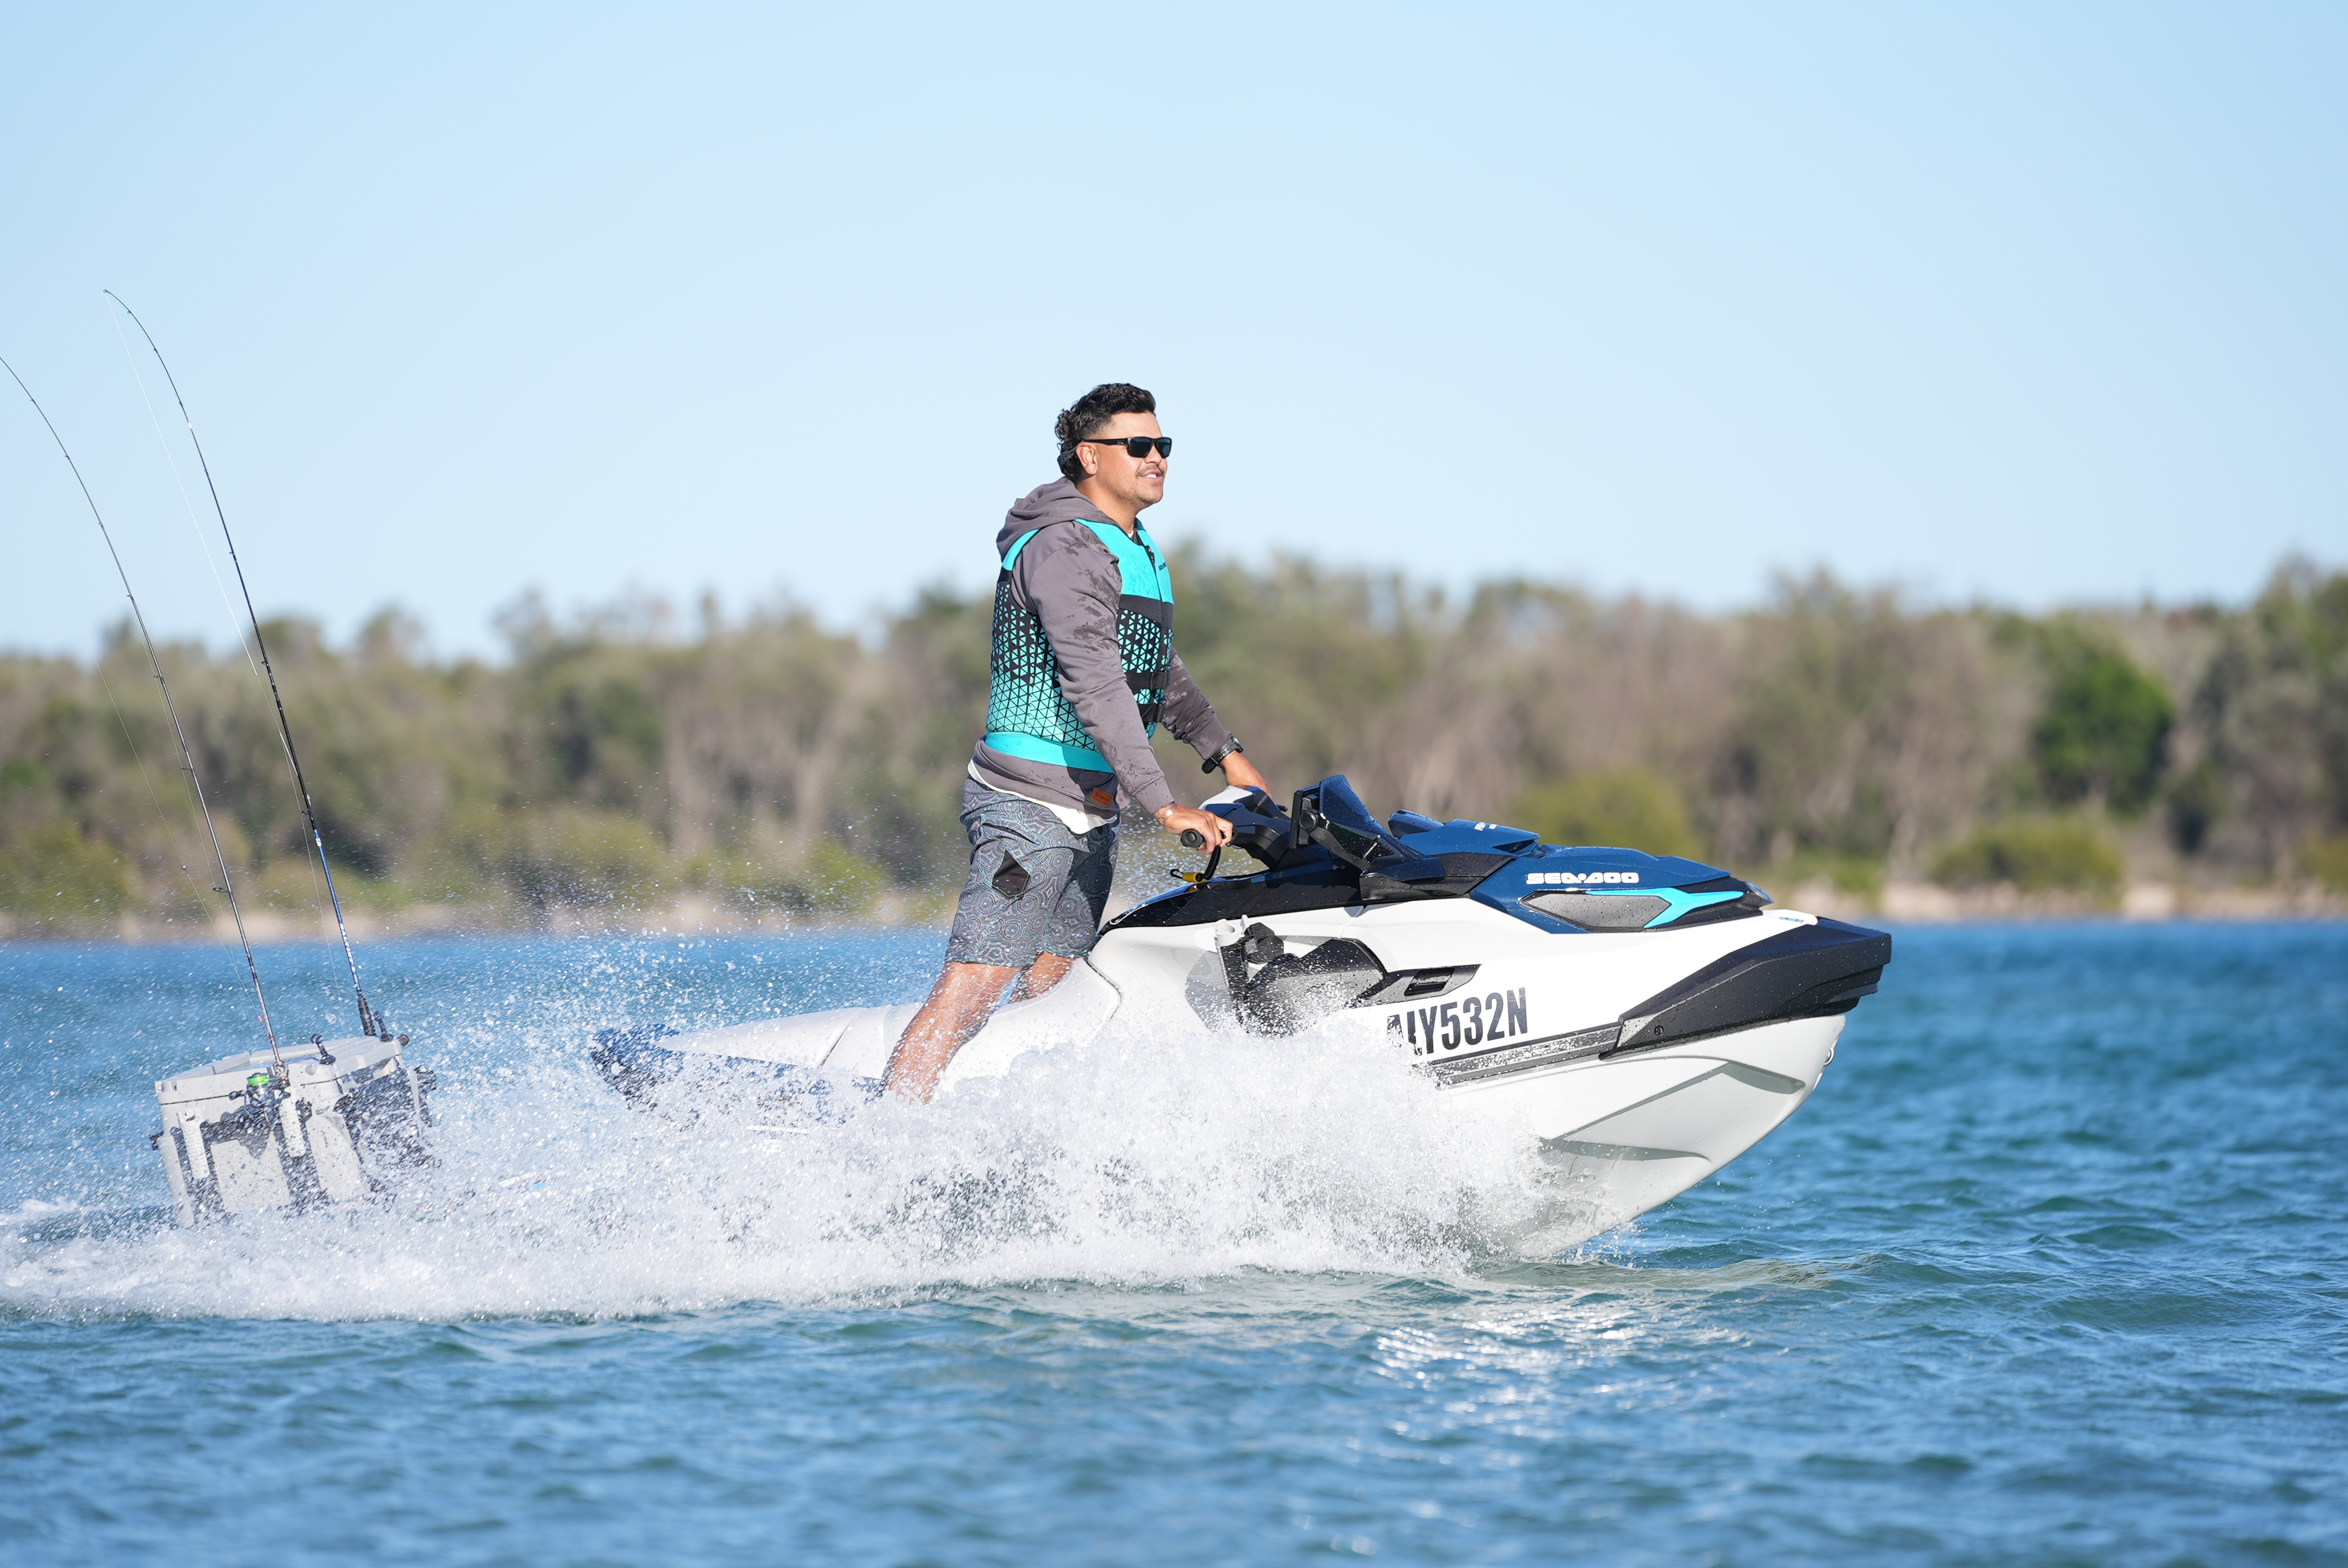 SEE WHAT RUGBY LEAGUE STAR LATRELL MITCHELL GETS UP TO OFF FIELD, ON THE LAND AND IN THE WATER